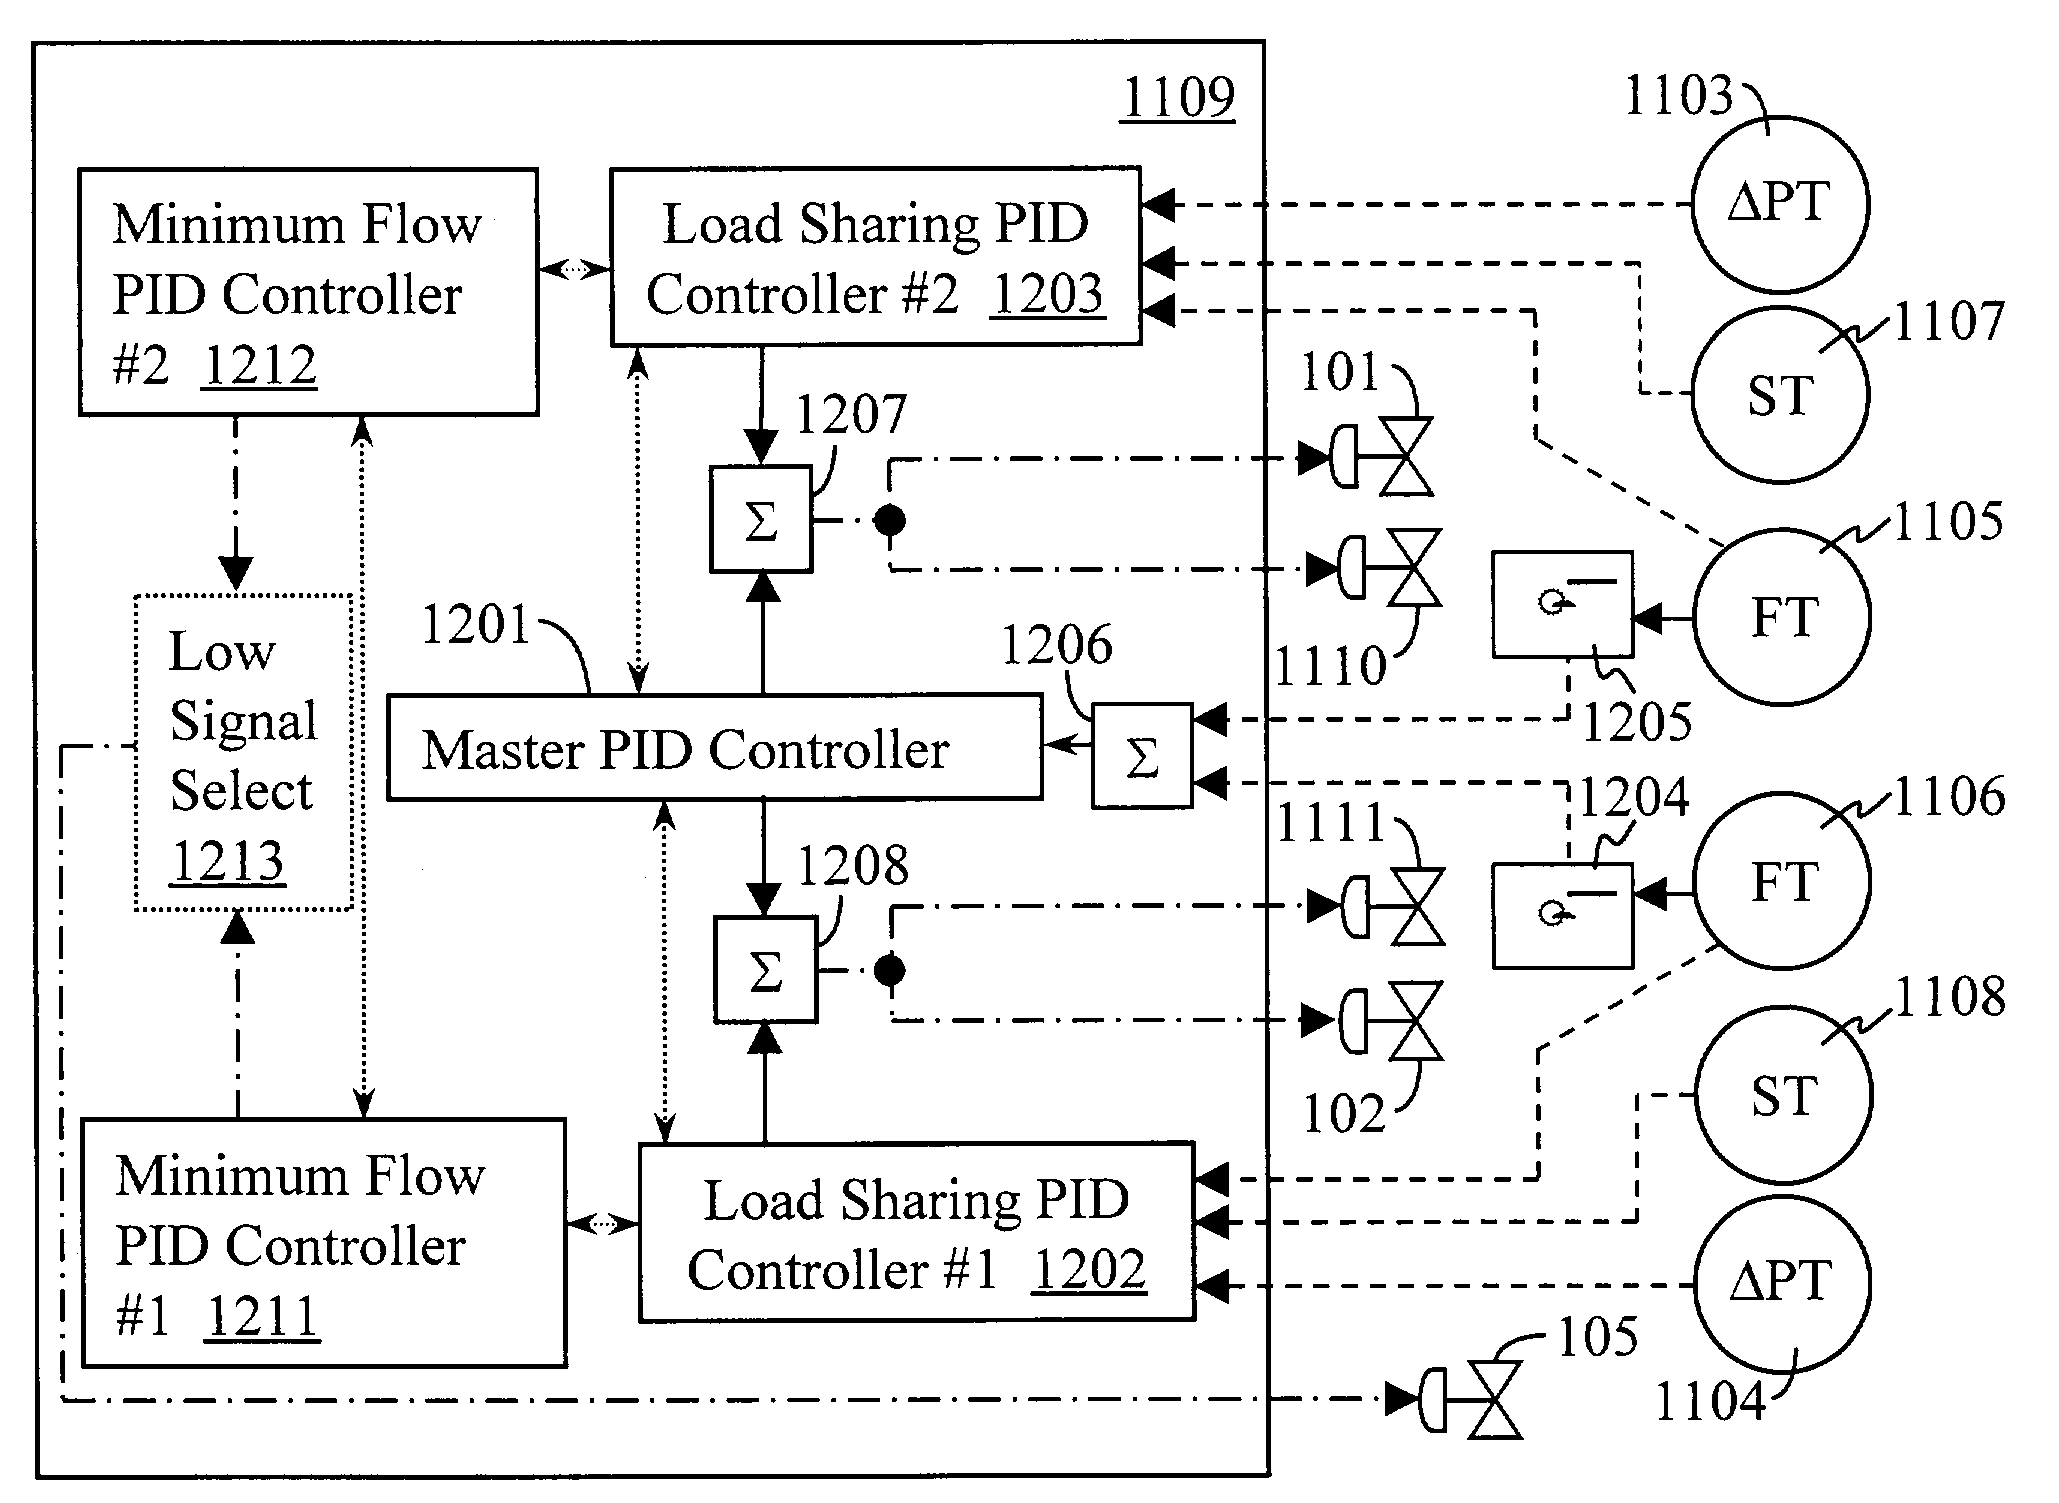 Controlling multiple pumps operating in parallel or series